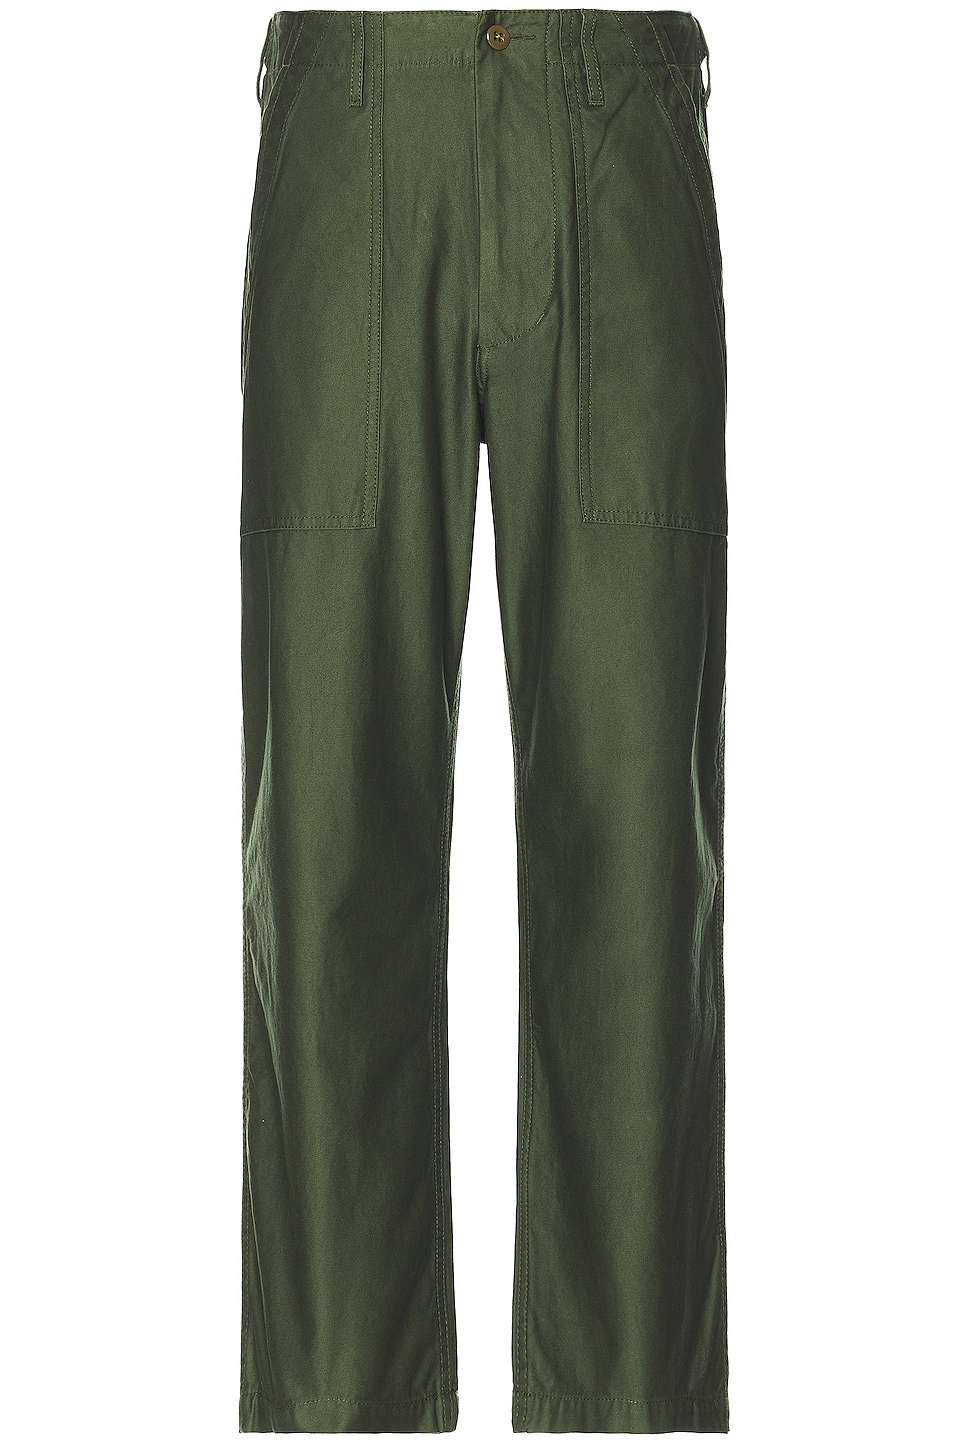 Image 1 of Beams Plus Mil Utility Trousers in Olive